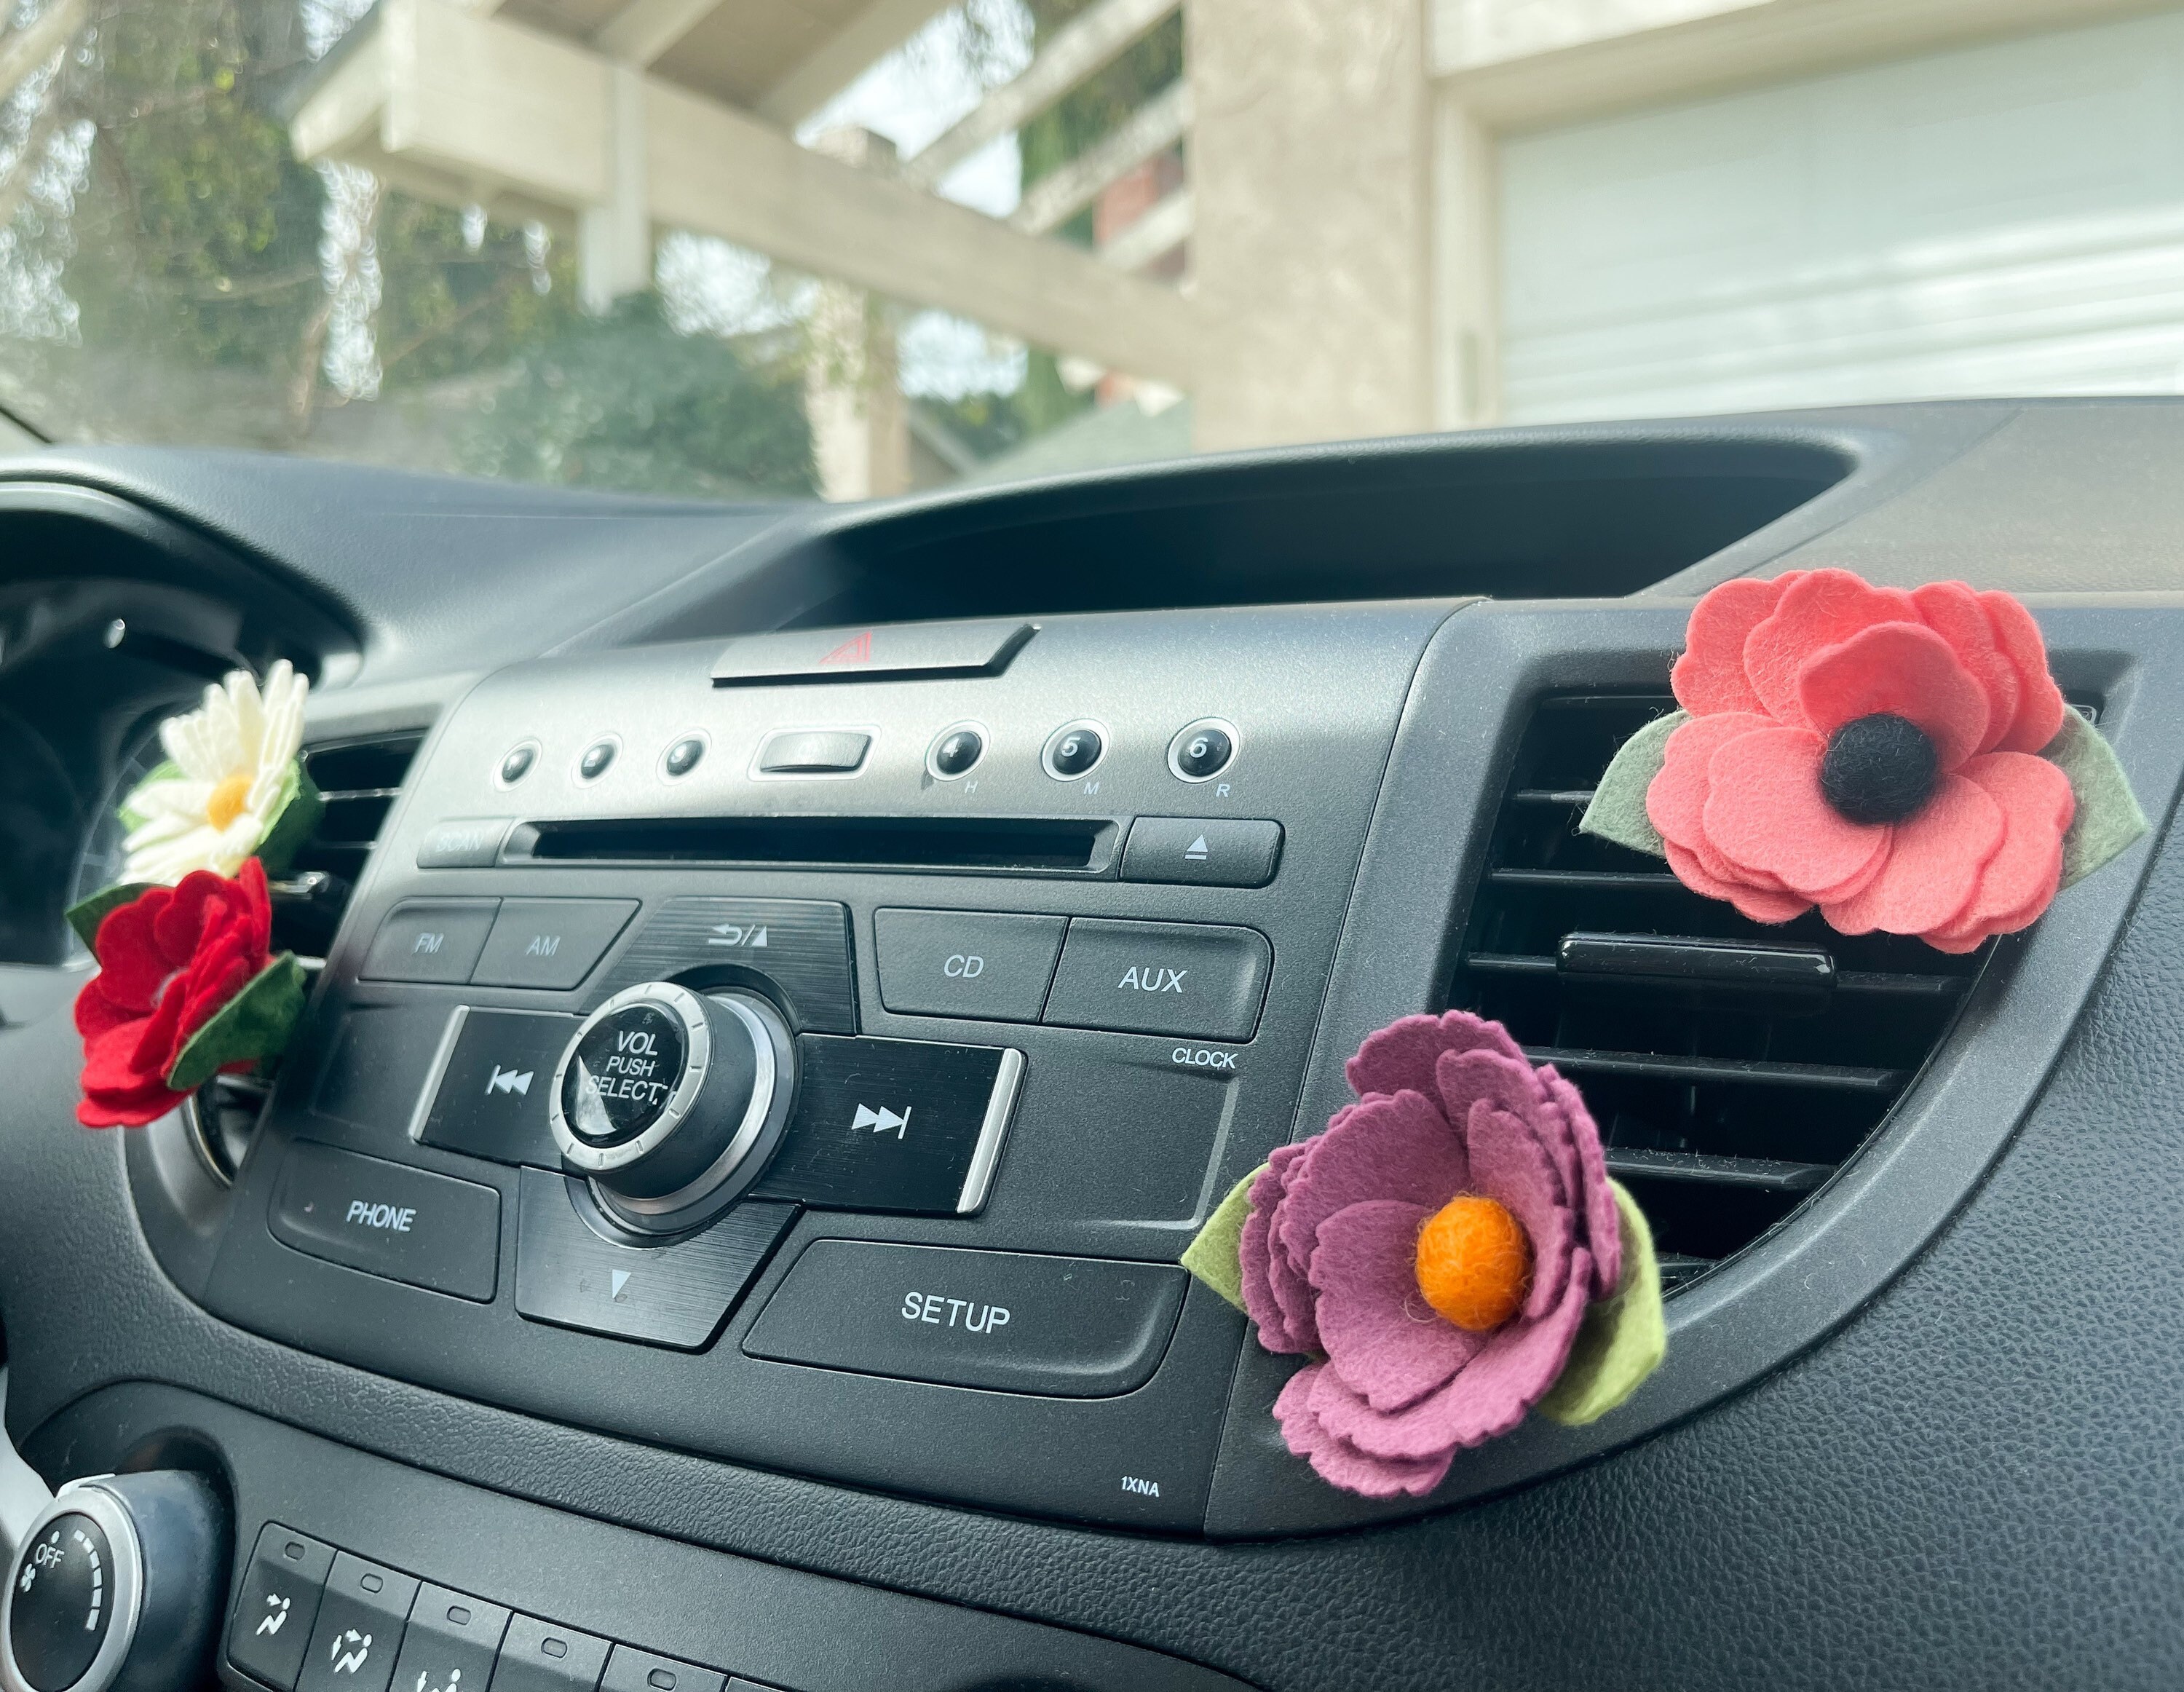 Essential Oil Car Diffuser Car Freshener Car Charm Boho Decor Wool Felt  Ball Car Vent Clip Handmade Gifts For Her Gifts For Him Party Favor